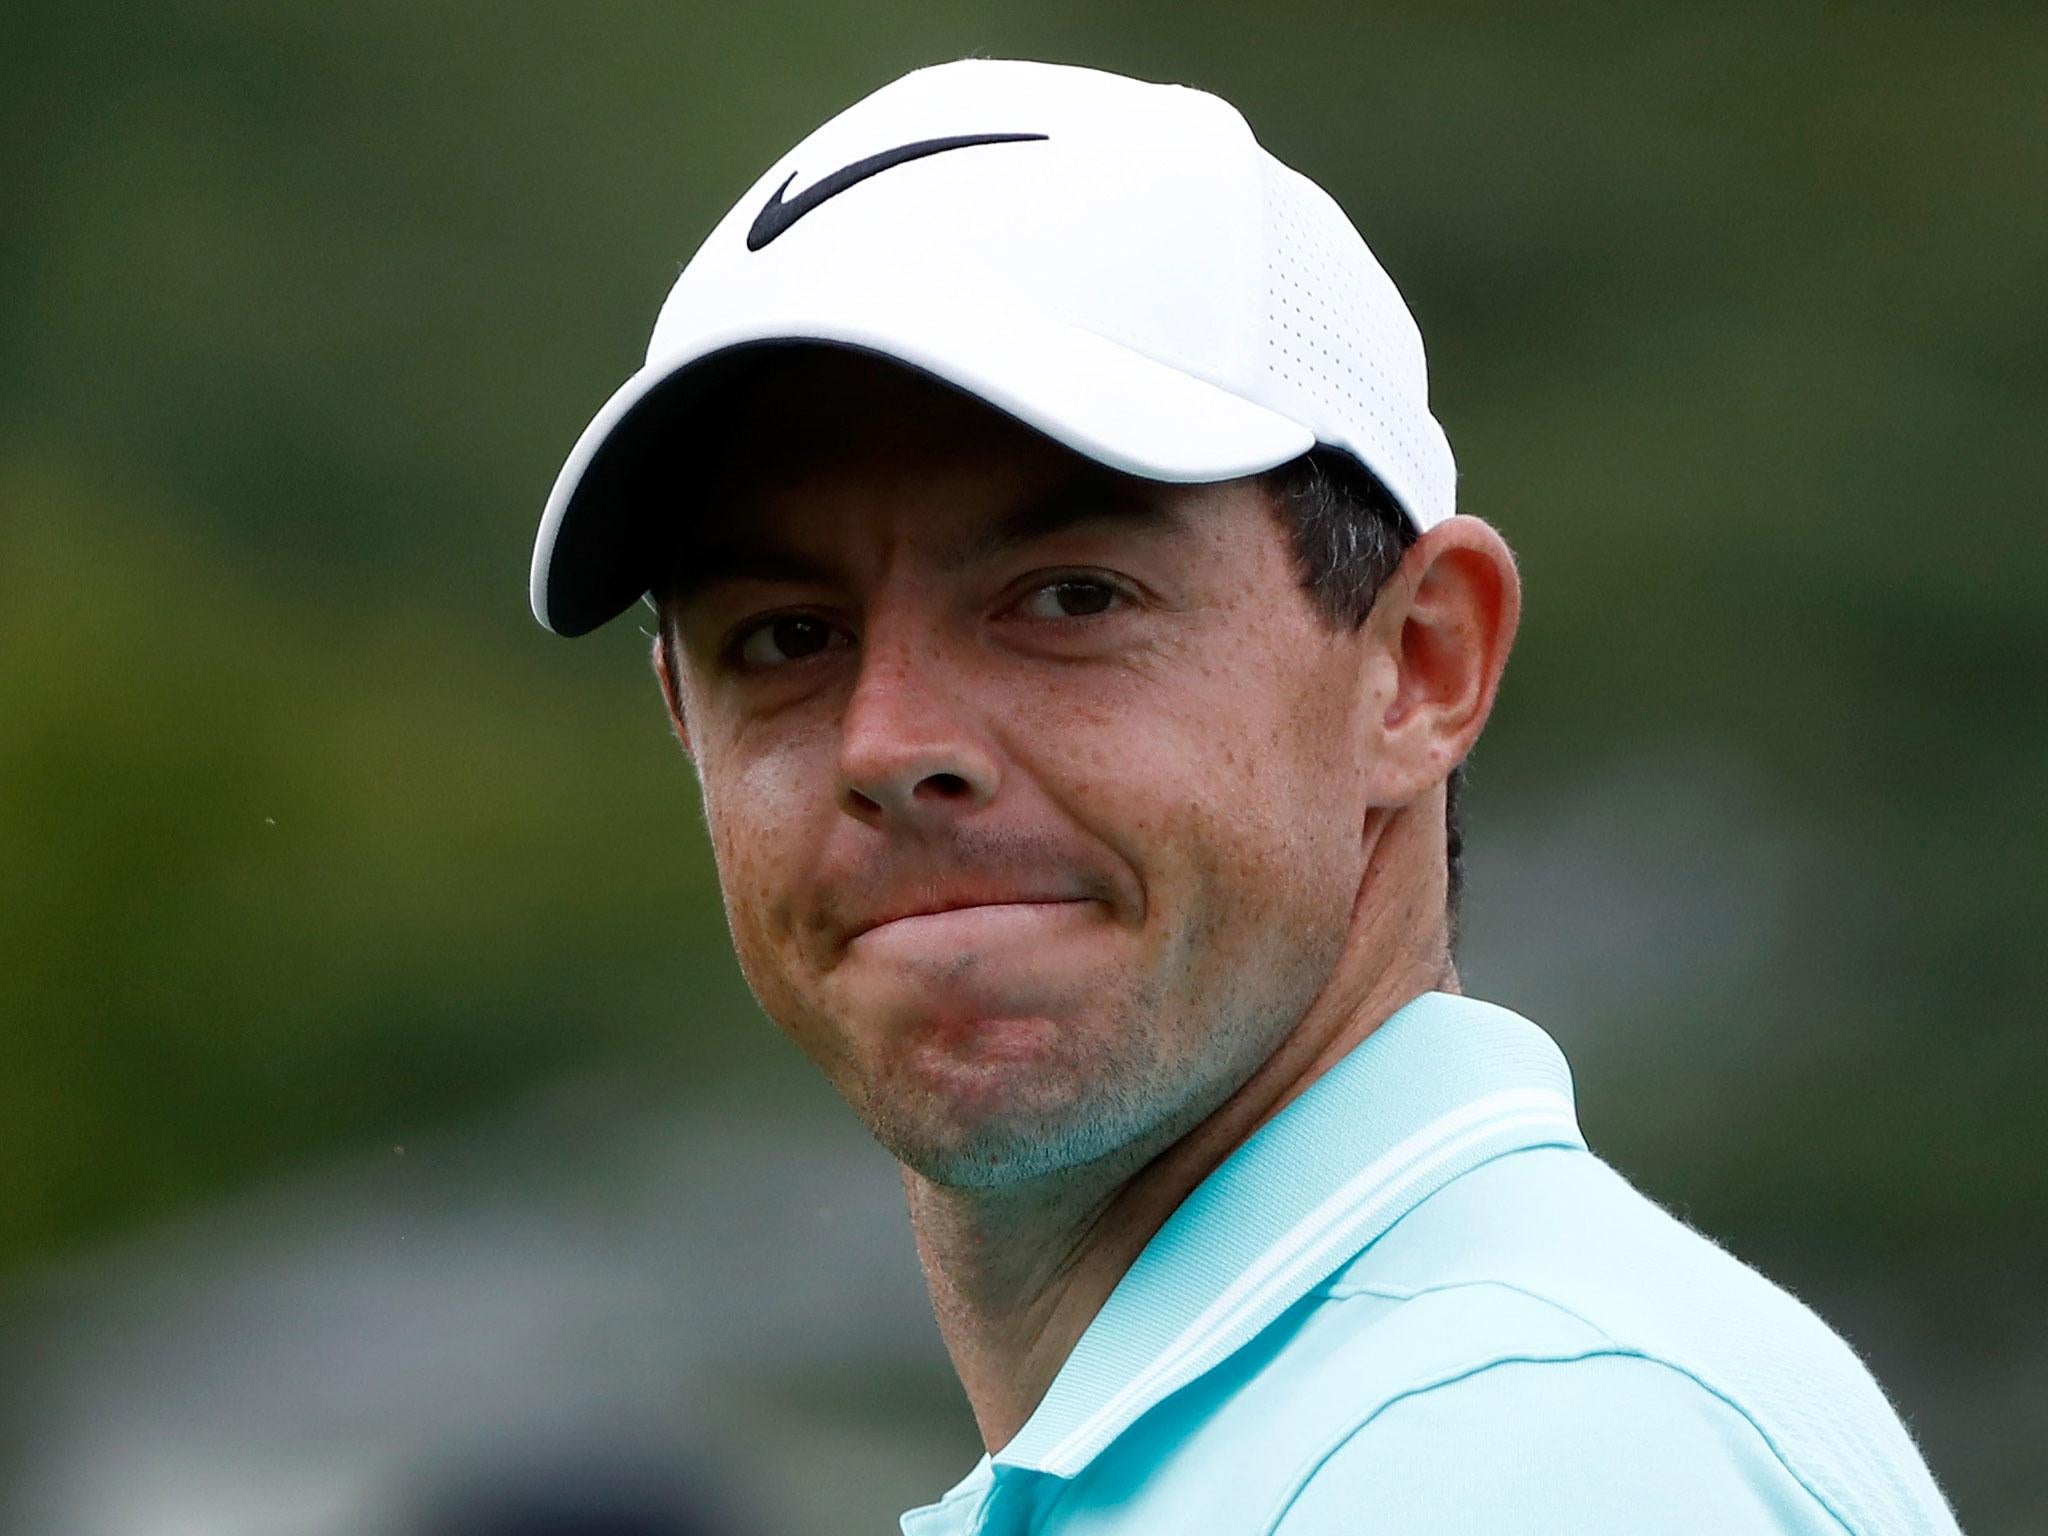 Rory McIlroy ended day one five shots off the pace